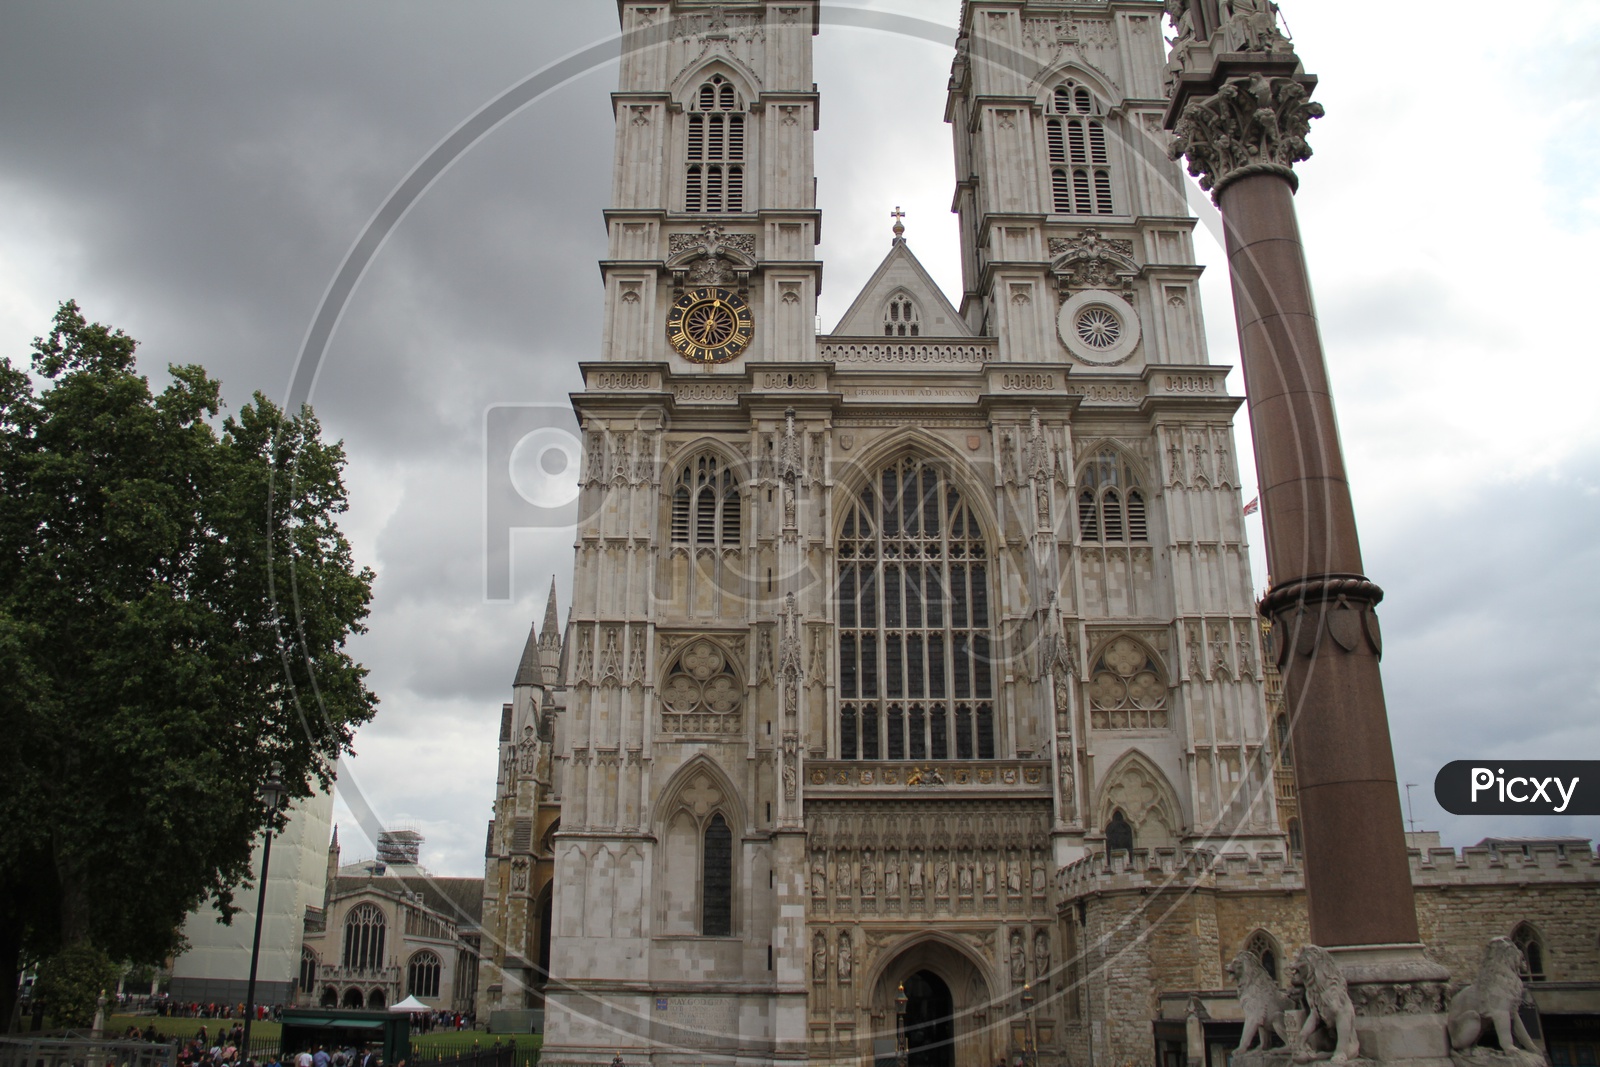 Architecture of Westminster Abbey or Collegiate Church